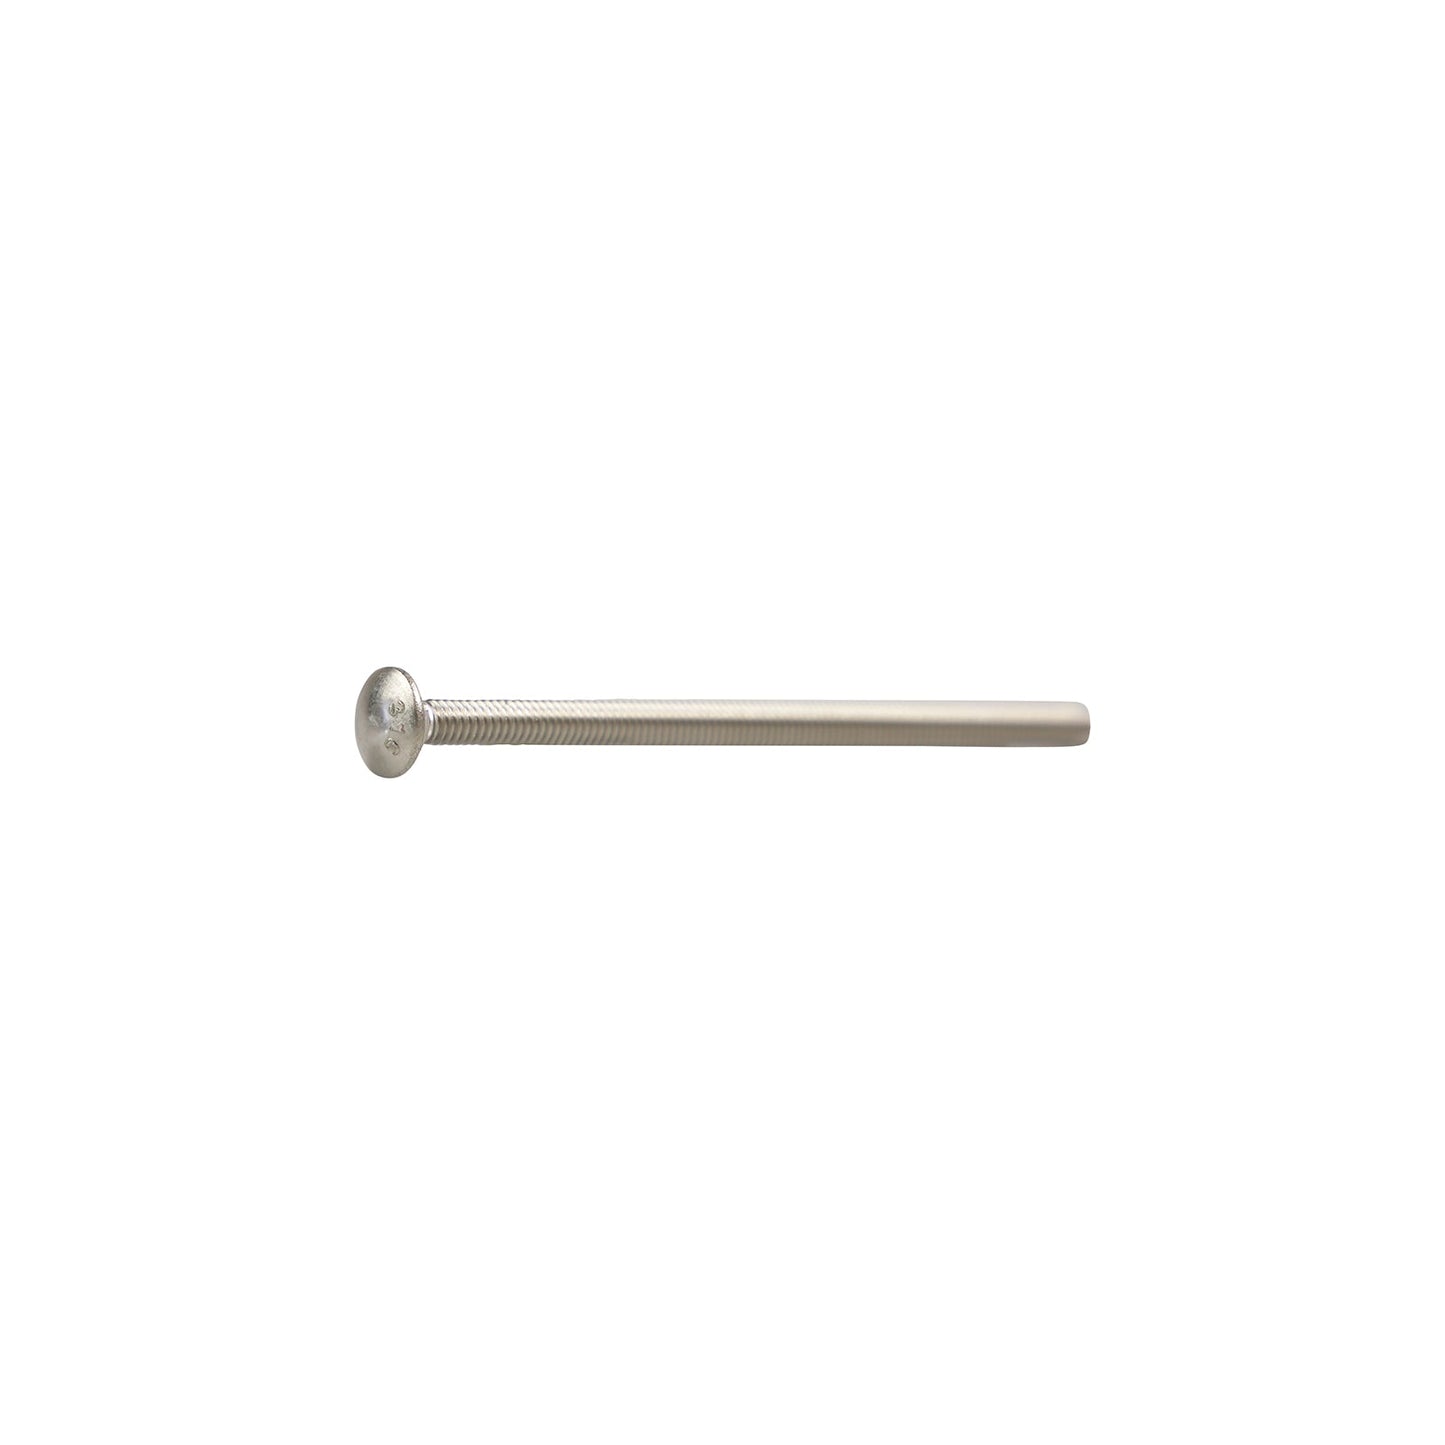 1/4"-20 x 5" Conquest Carriage Bolt - 316 Stainless Steel